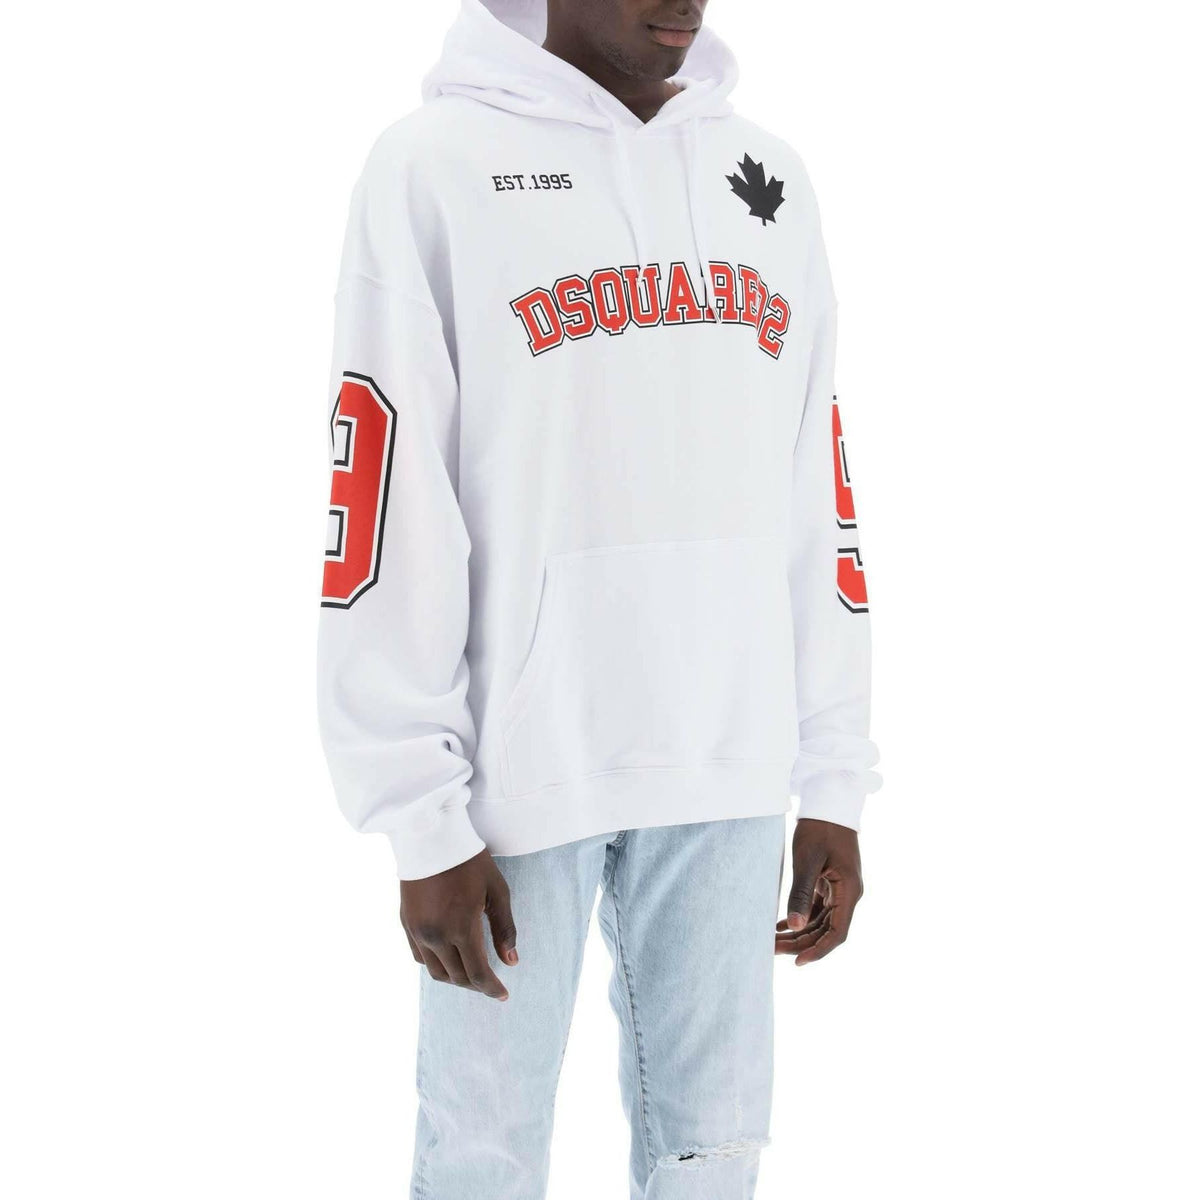 DSQUARED2 - White Hooded Caten 64 Cotton Sweatshirt With Numerical Prints - JOHN JULIA